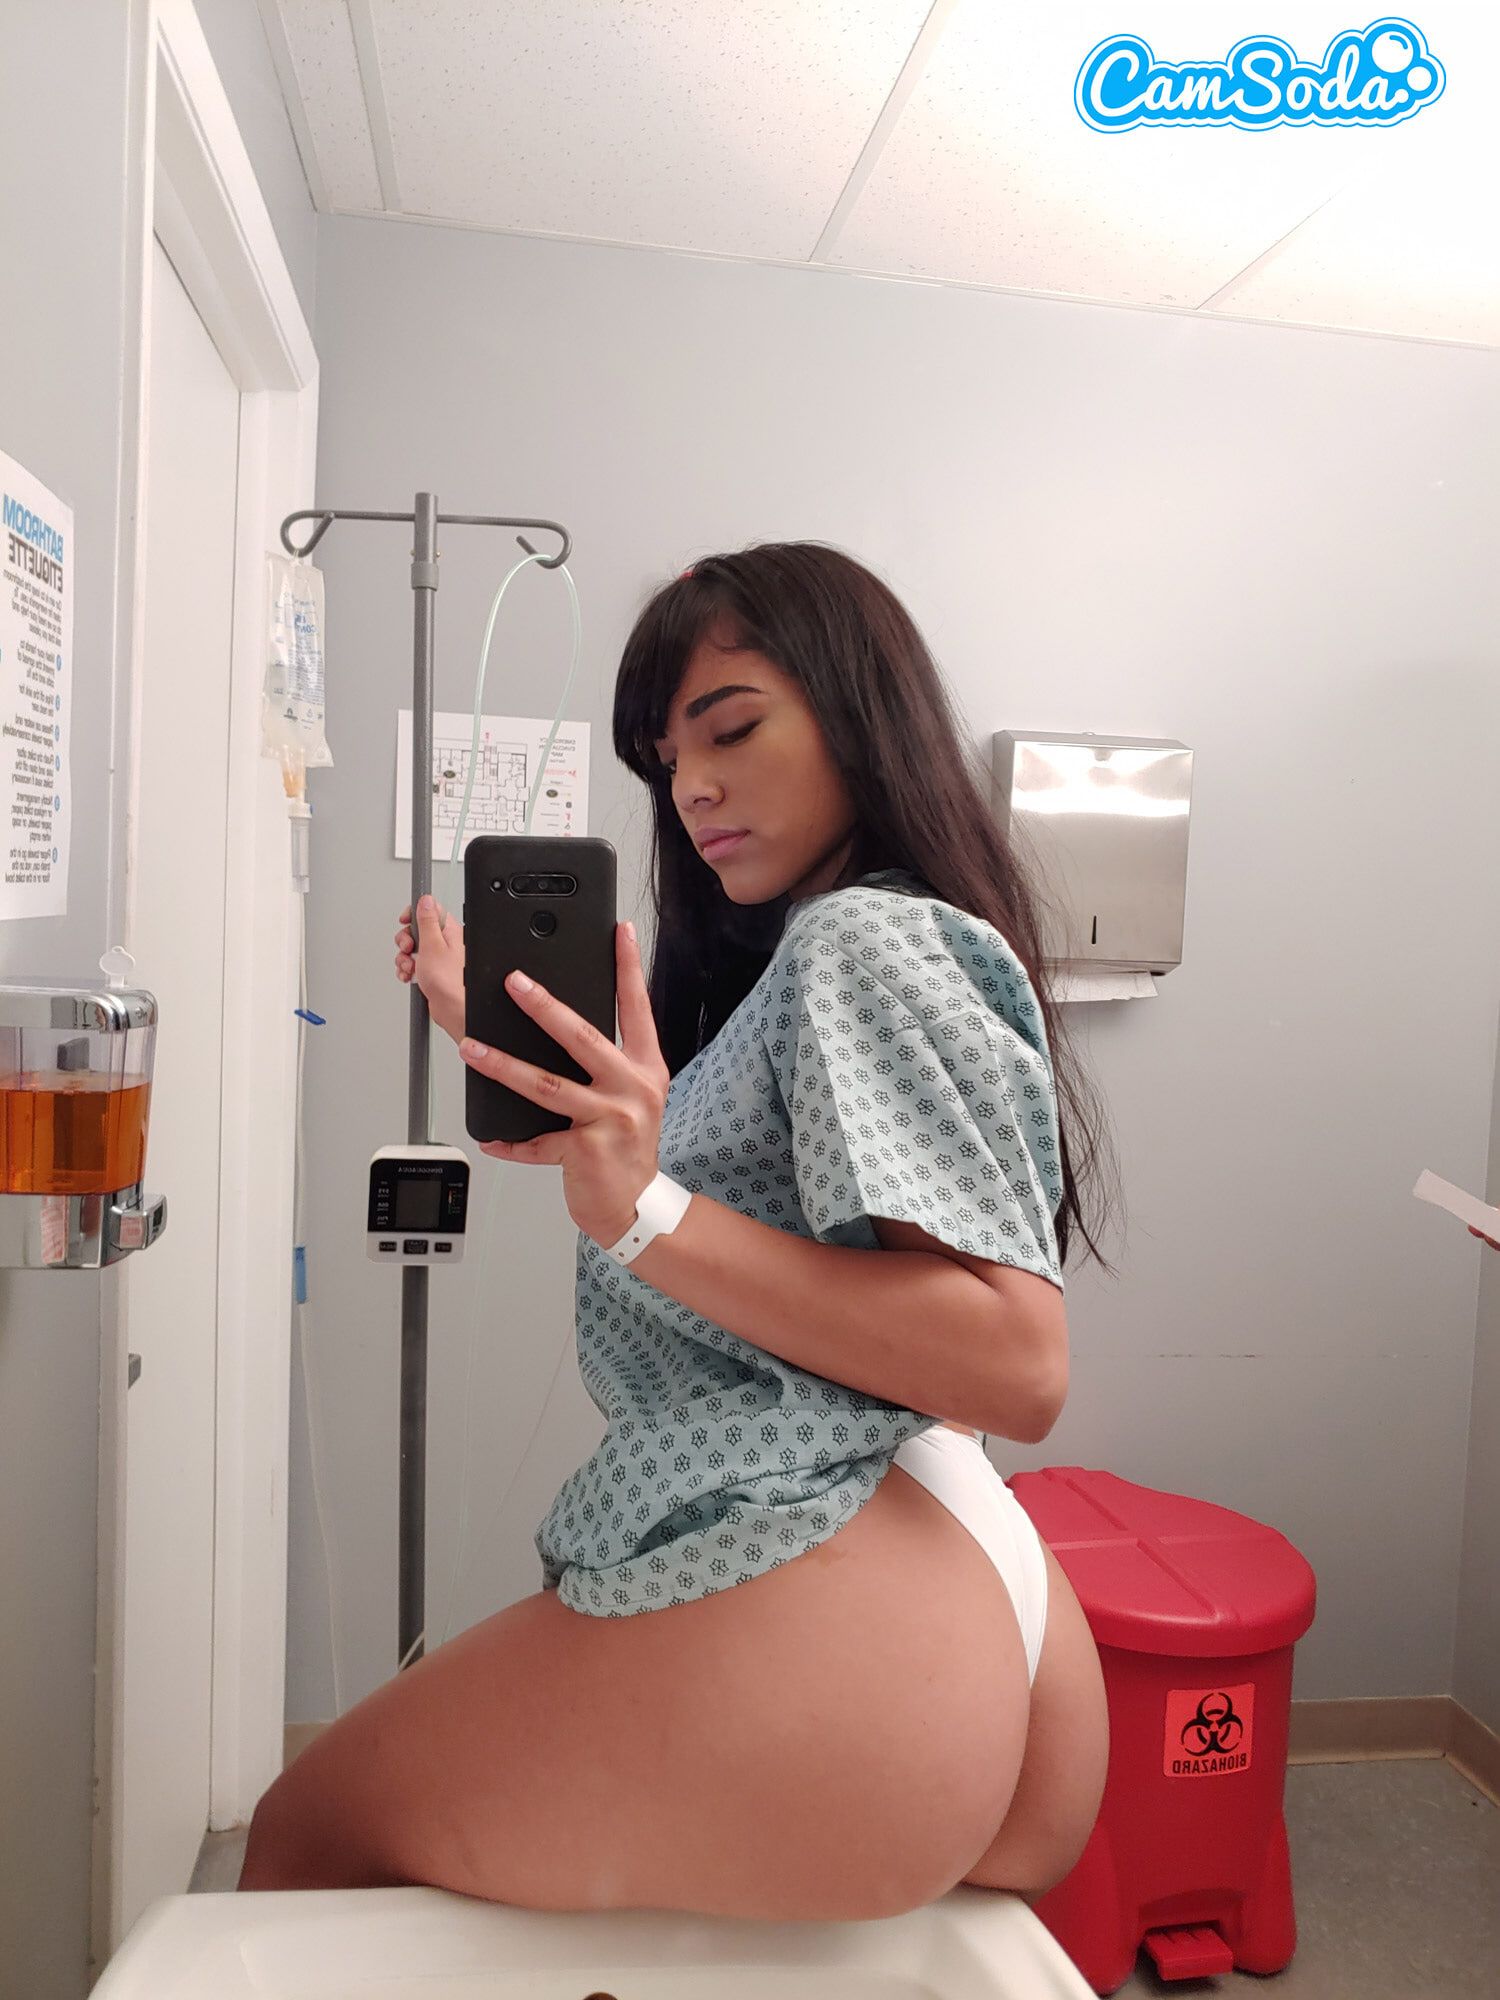 Big bootied latina teen gets horny in the ER #19